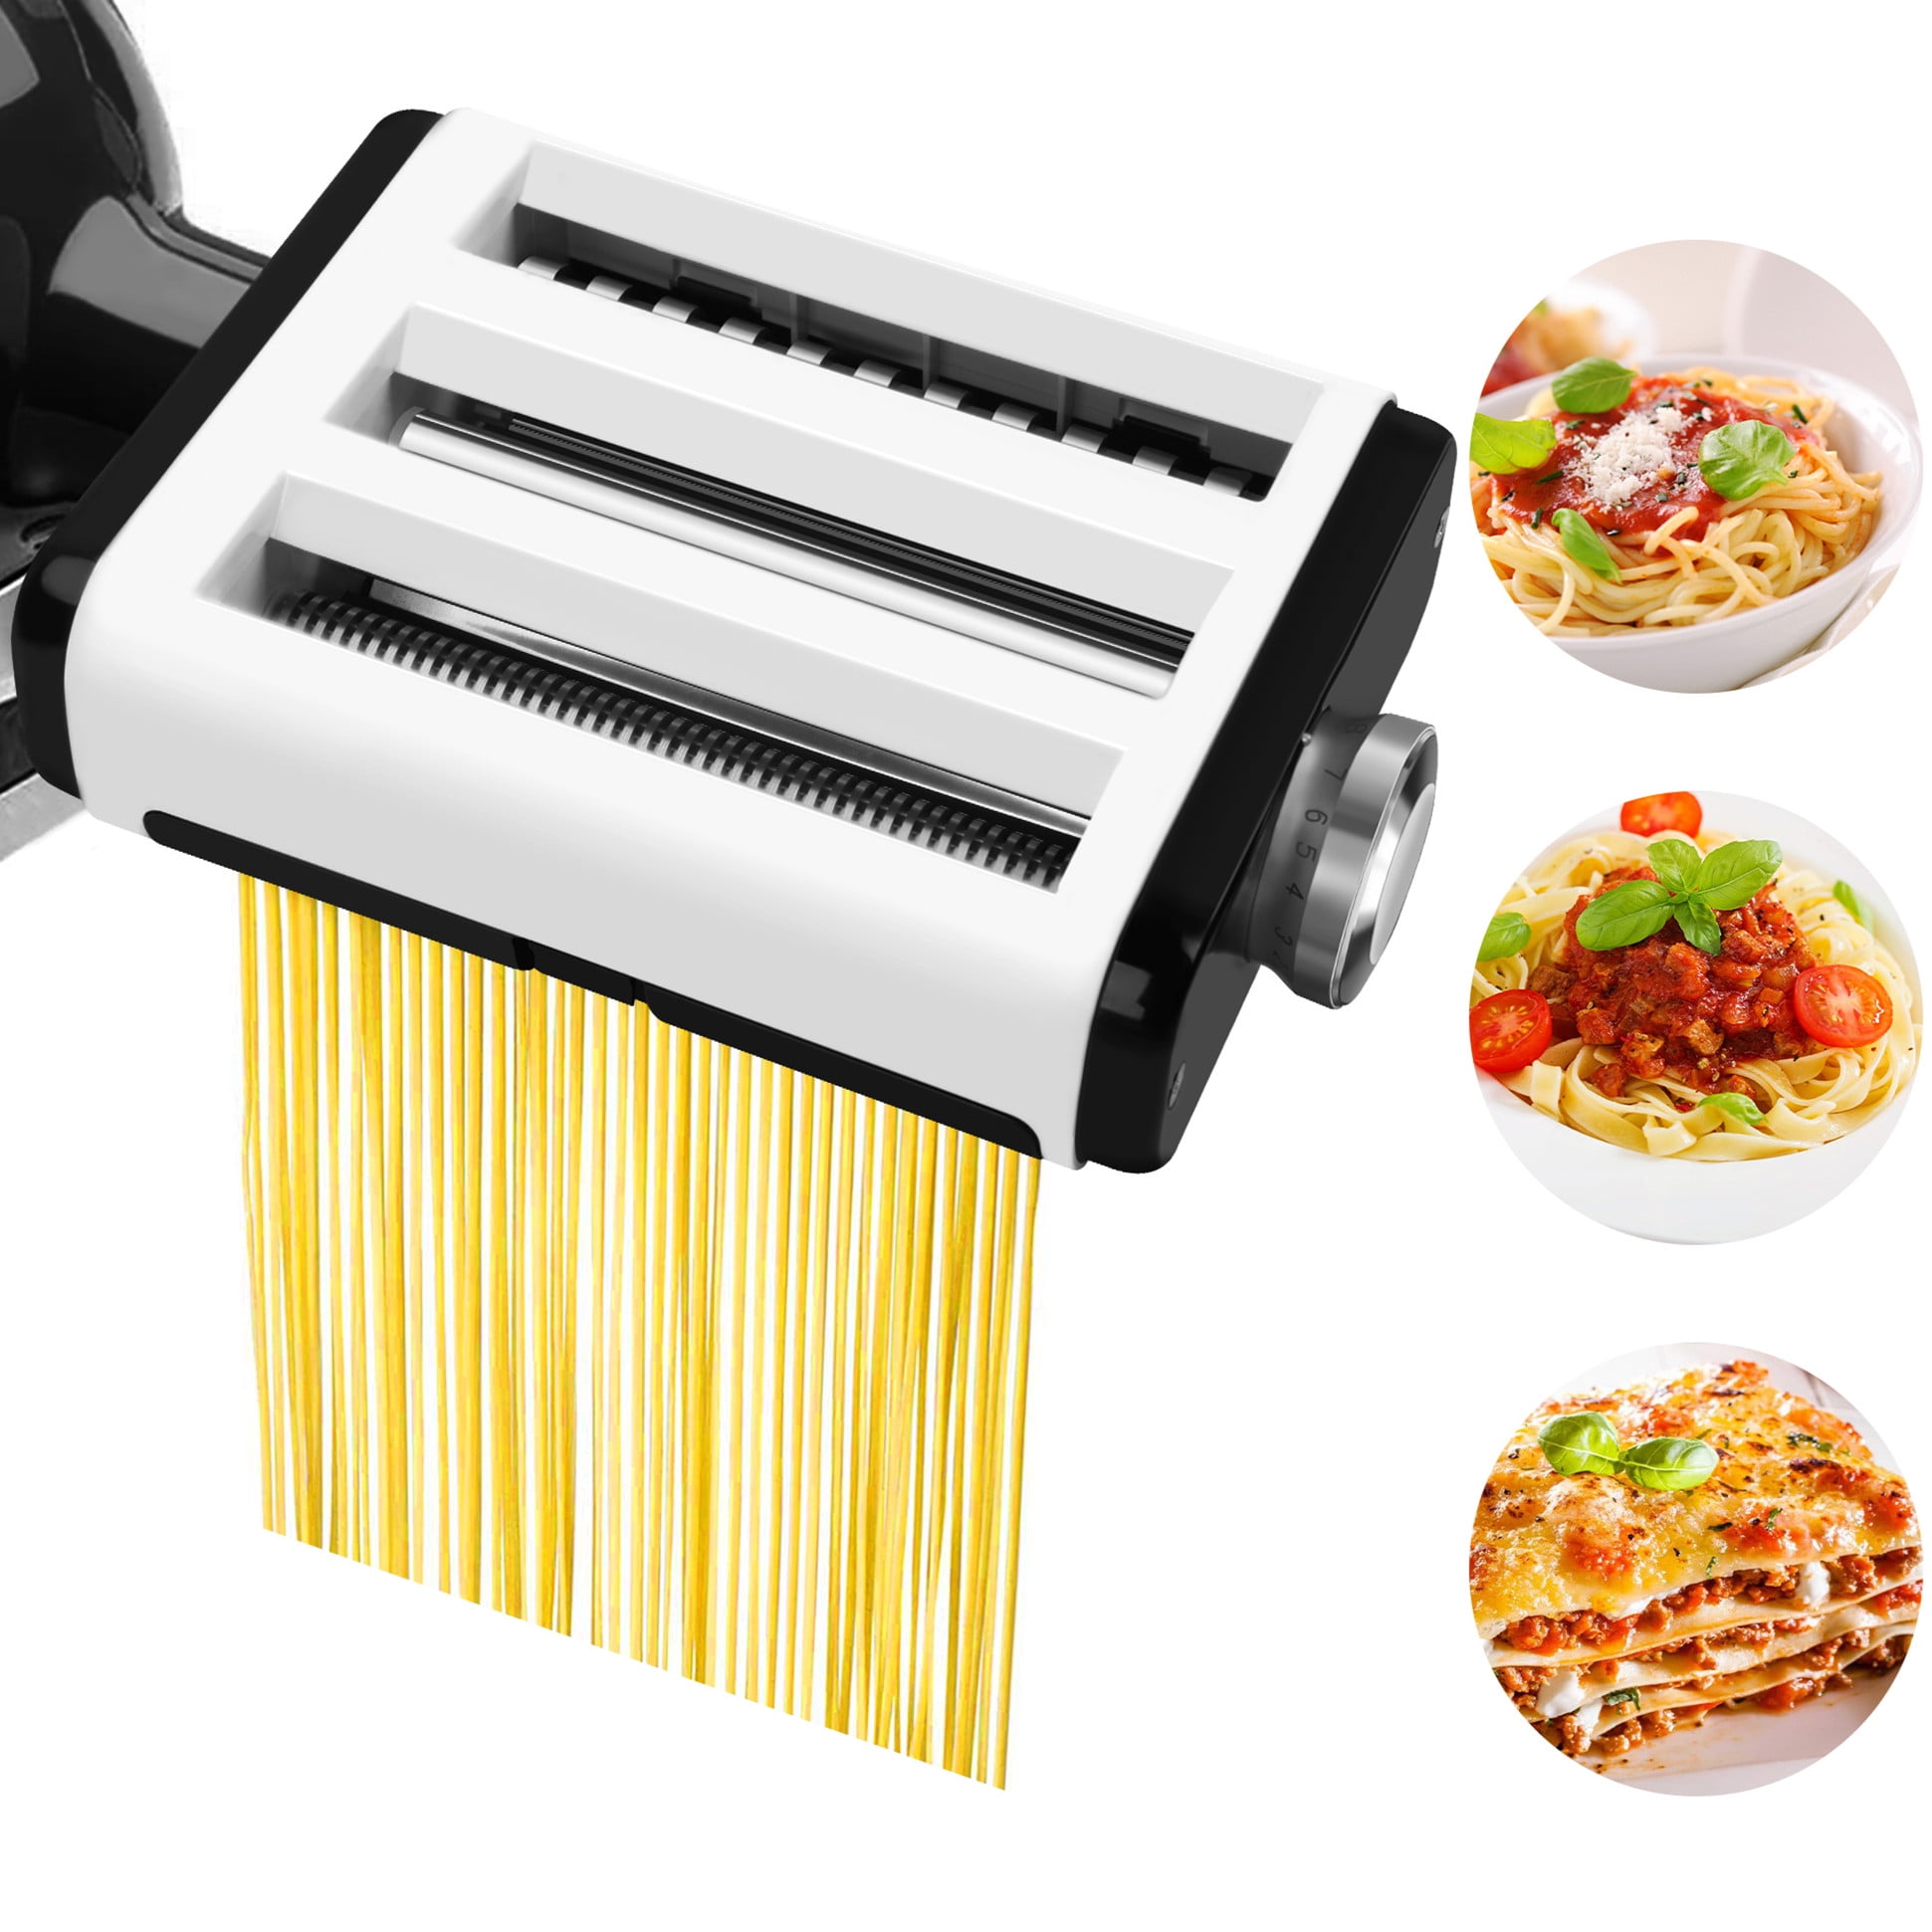 ZACME STAINLESS STEEL 3 in 1 PASTA MAKER ATTACHMENT FOR KITCHENAID